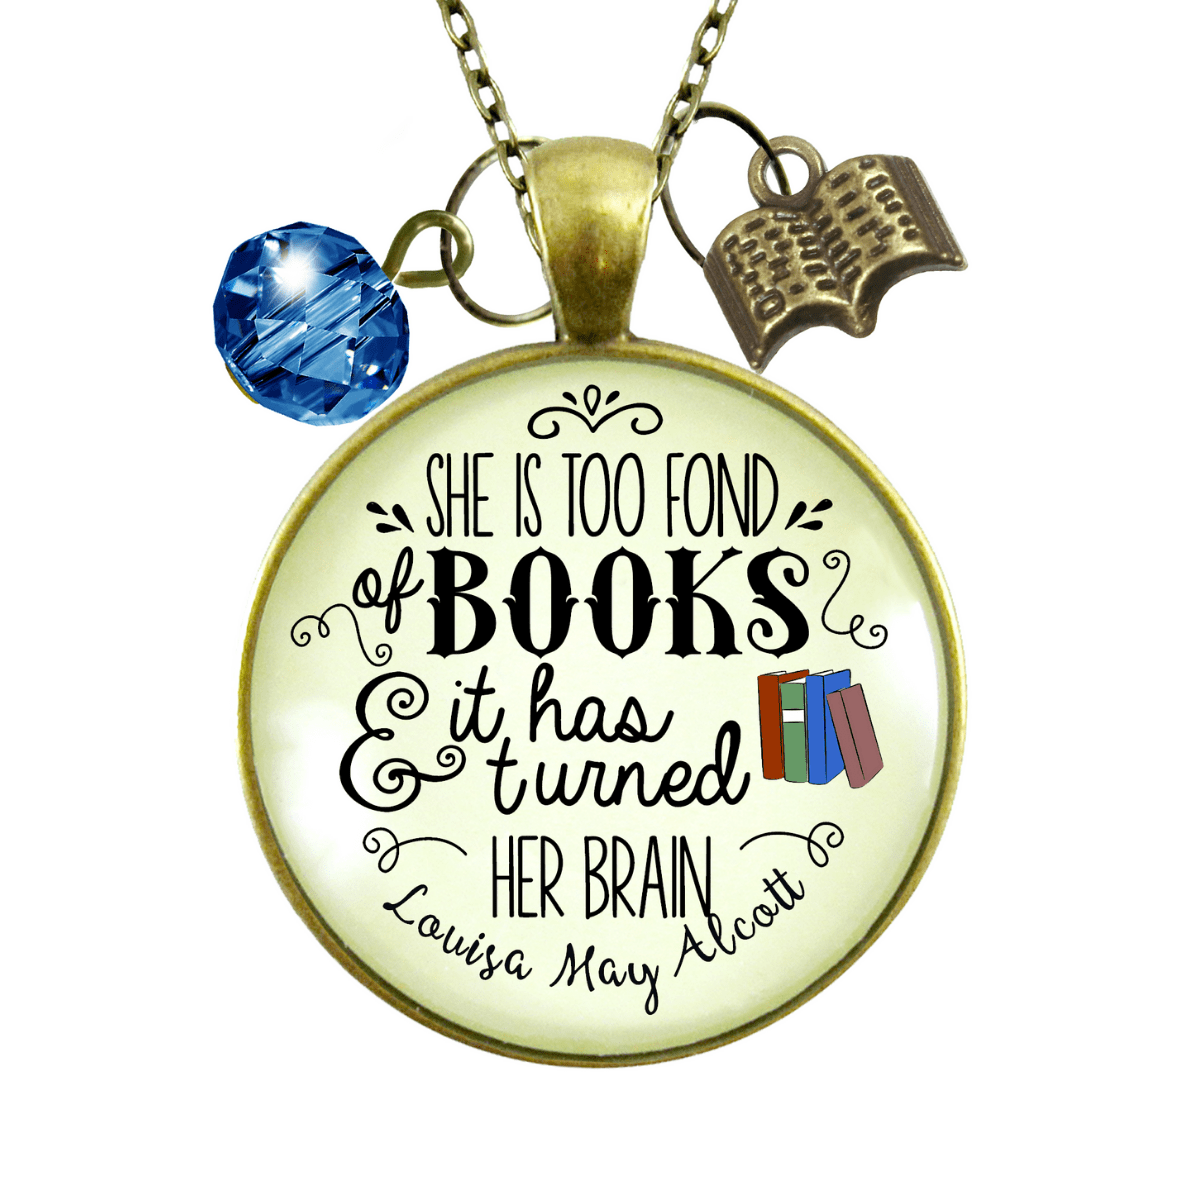 Gutsy Goodness Readers Necklace She Too Fond Of Books Louisa May Alcott Quote Jewelry Red Charm - Gutsy Goodness Handmade Jewelry;Readers Necklace She Too Fond Of Books Louisa May Alcott Quote Jewelry Red Charm - Gutsy Goodness Handmade Jewelry Gifts